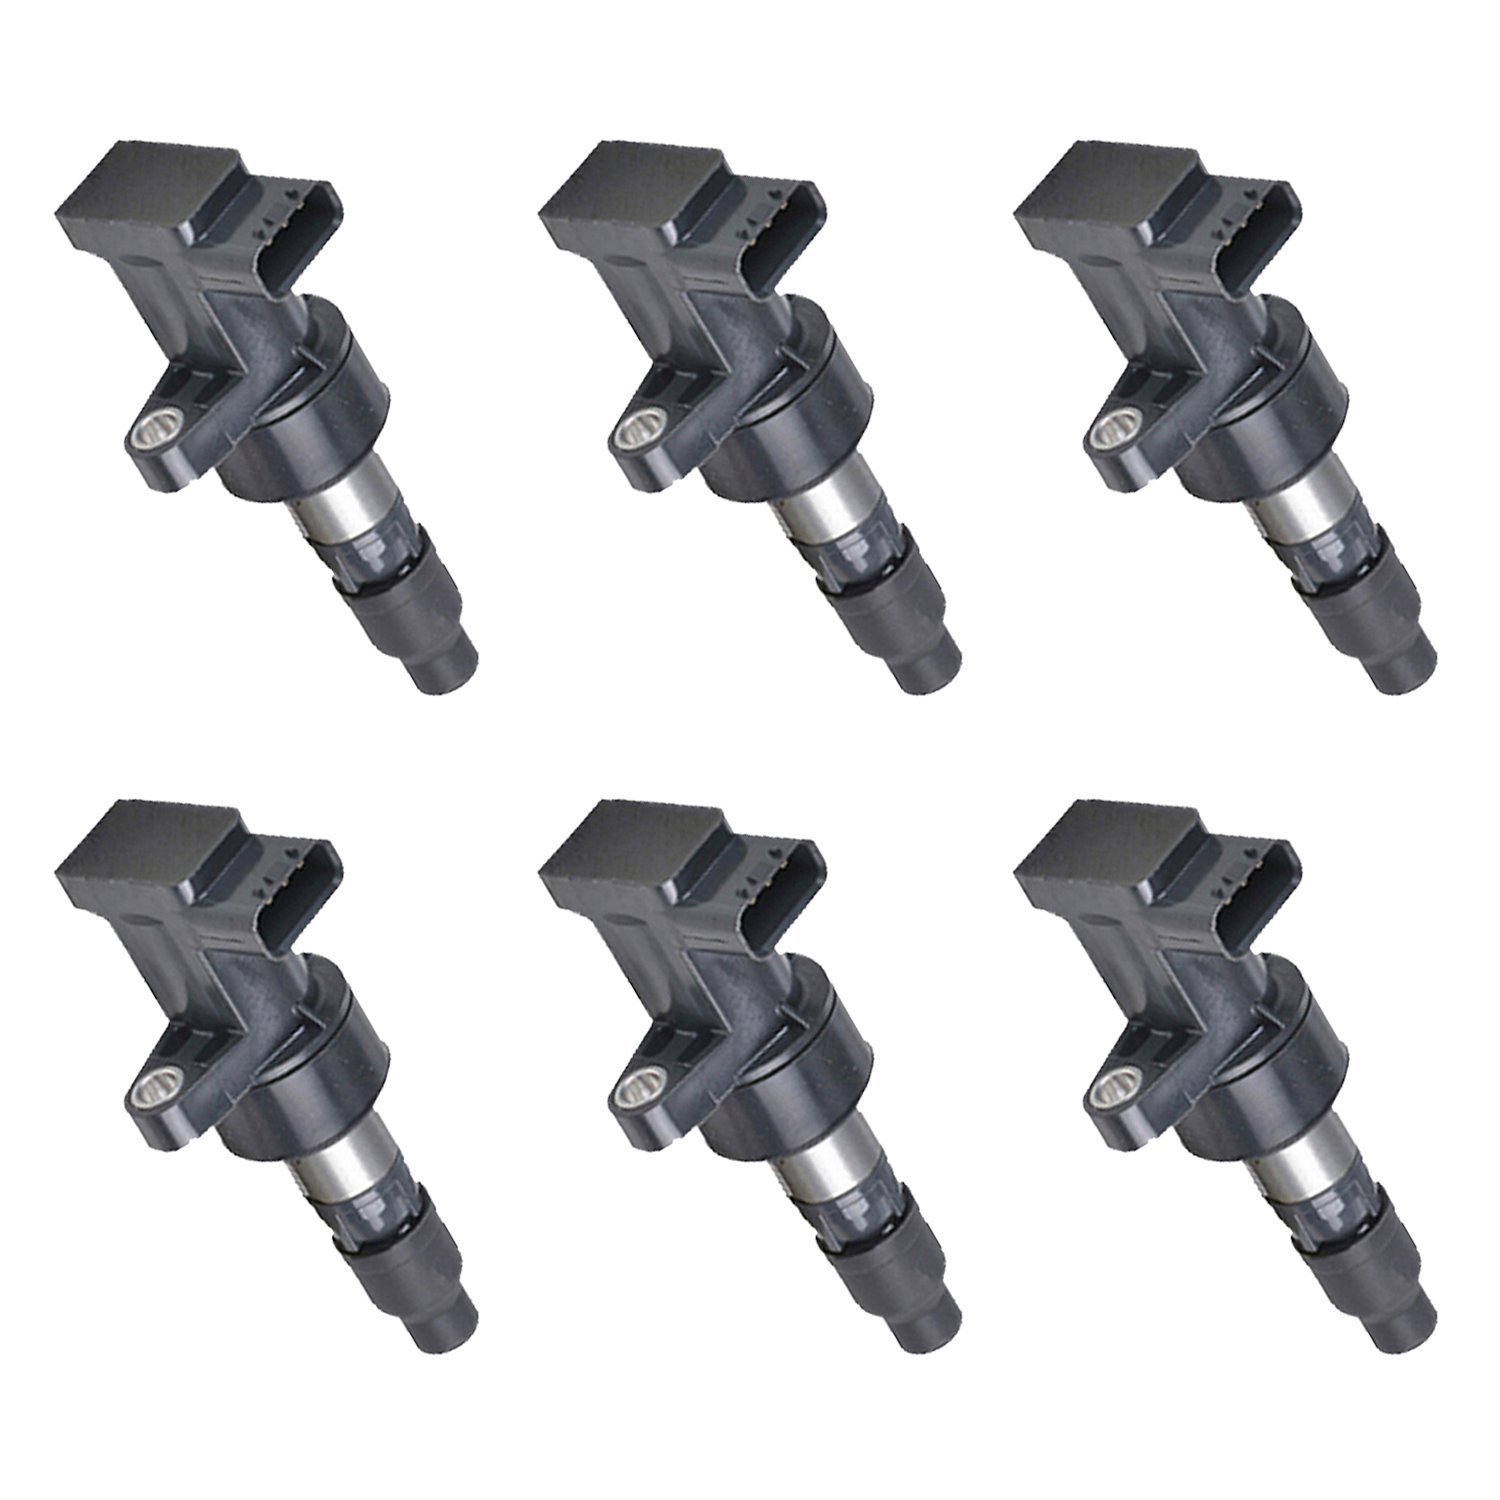 OE Replacement Ignition Coils for 2003-2008 Jaguar S-Type X-Type 3.0L